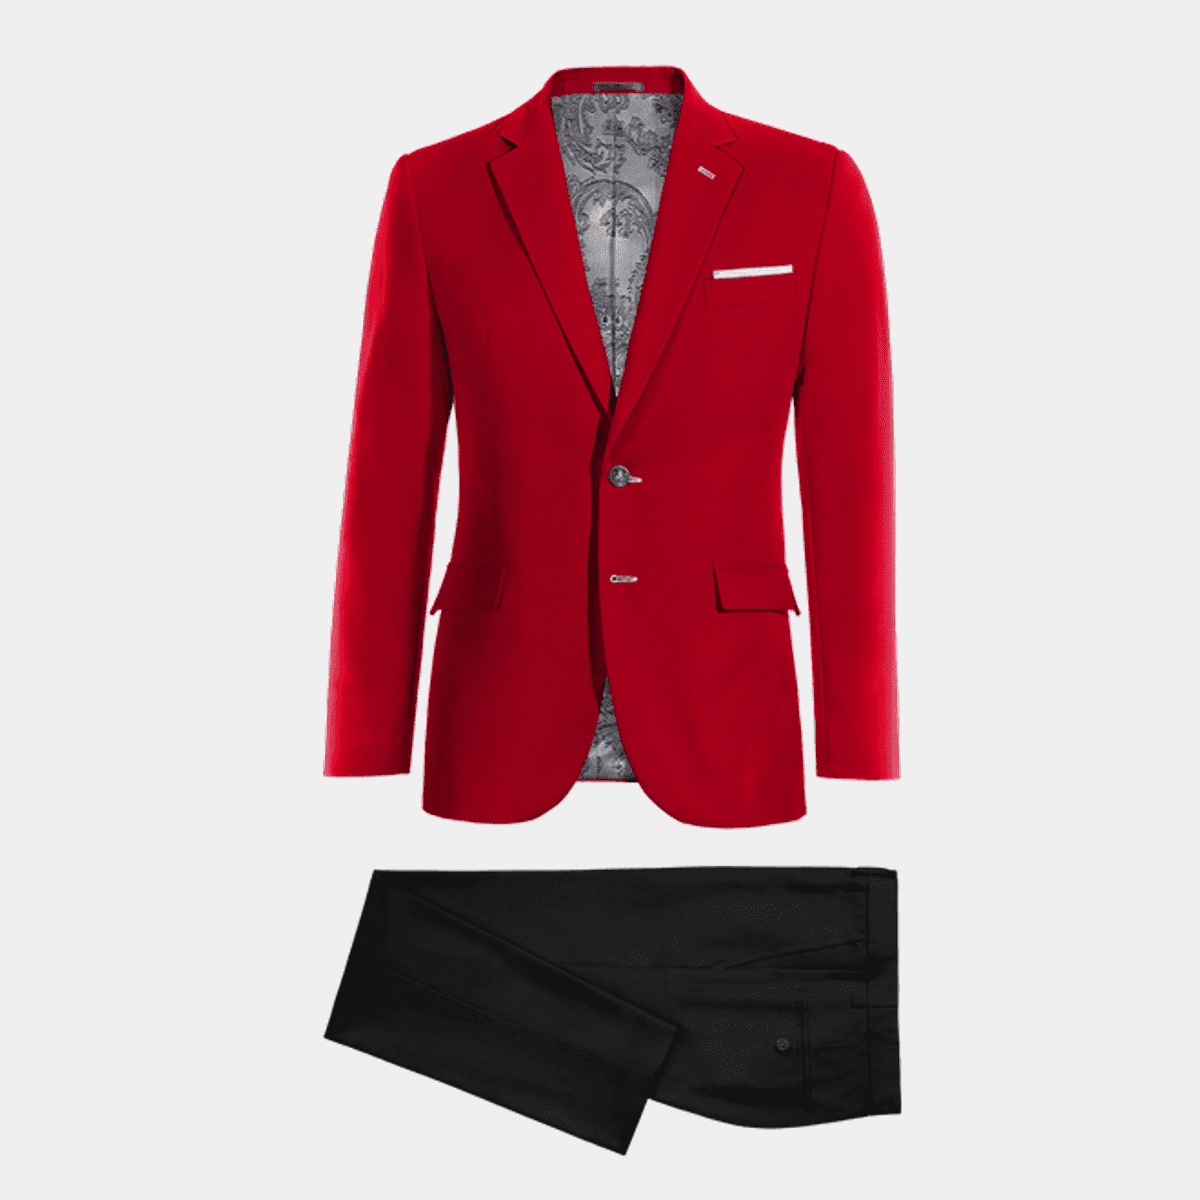 Intense red super 100s year-round Suit with pocket square